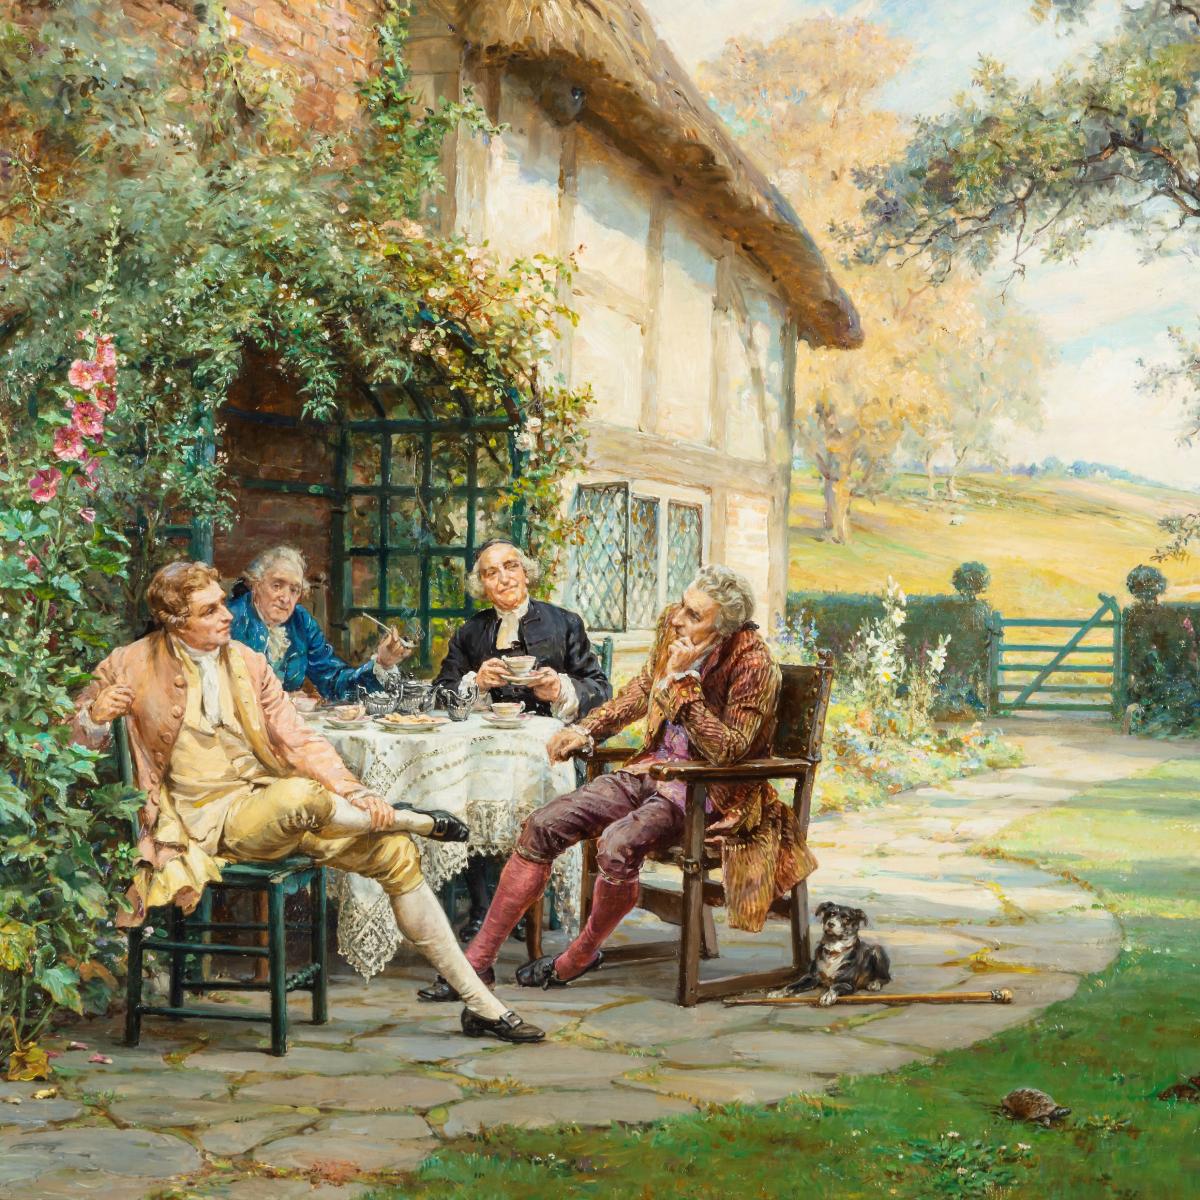 ‘Tea at the Vicarage’ by Margaret Dovaston, dated 1952